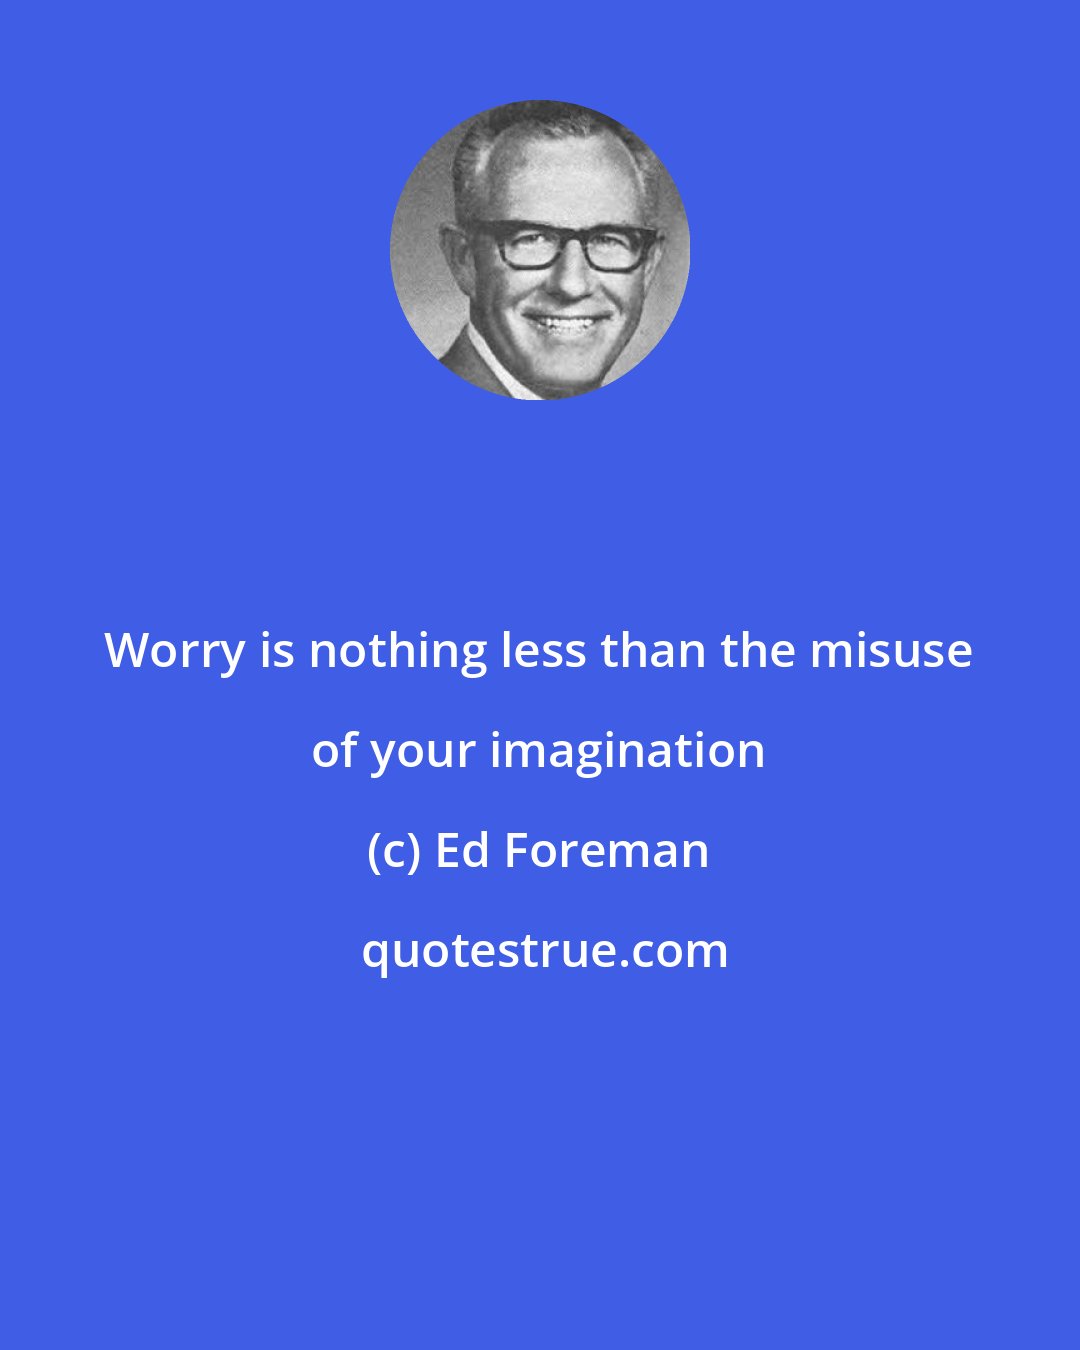 Ed Foreman: Worry is nothing less than the misuse of your imagination